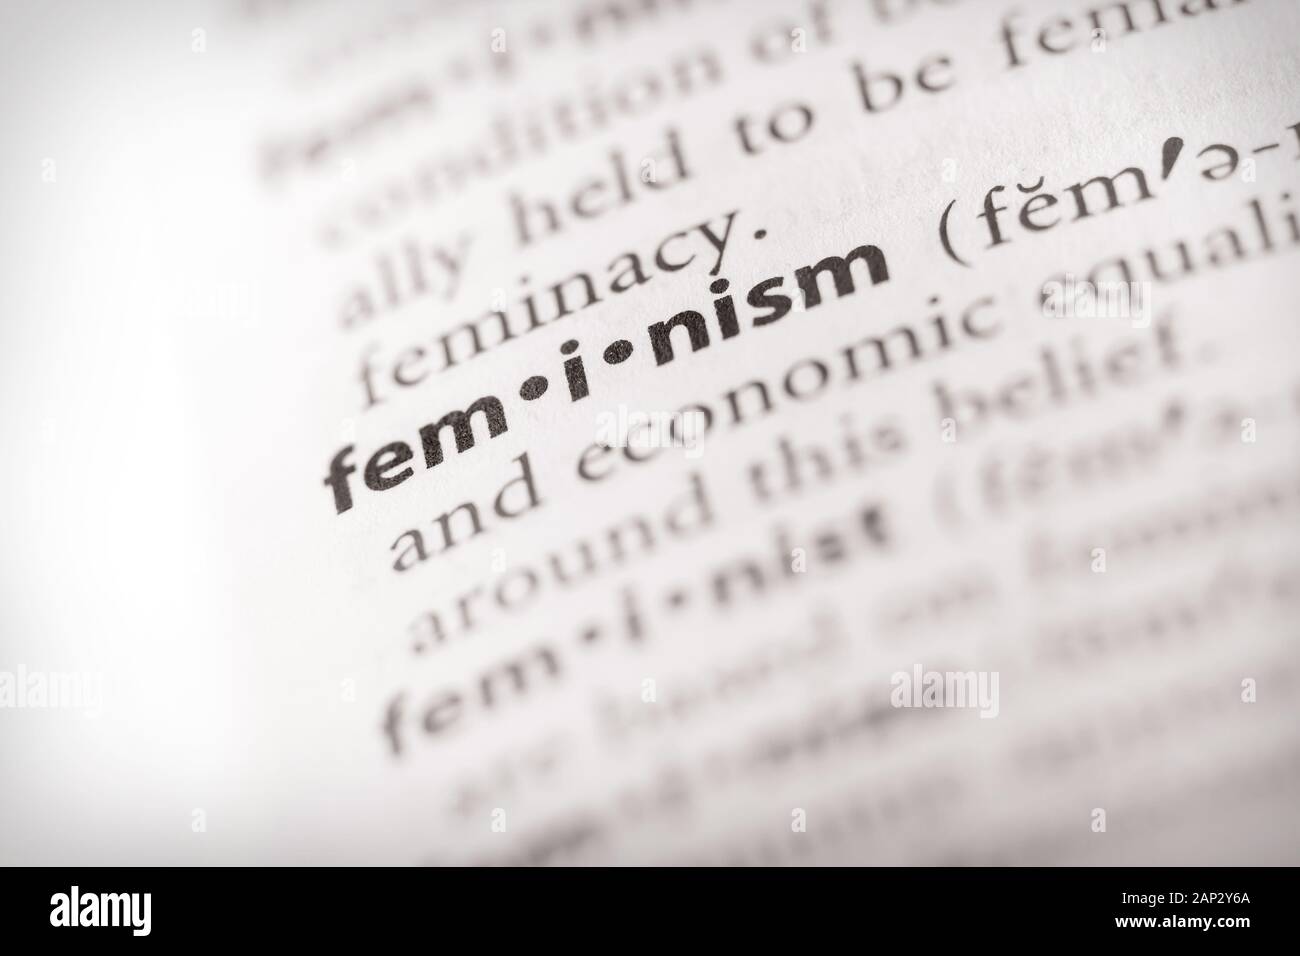 Selective focus on the word feminism. Many more word photos in my portfolio. Stock Photo